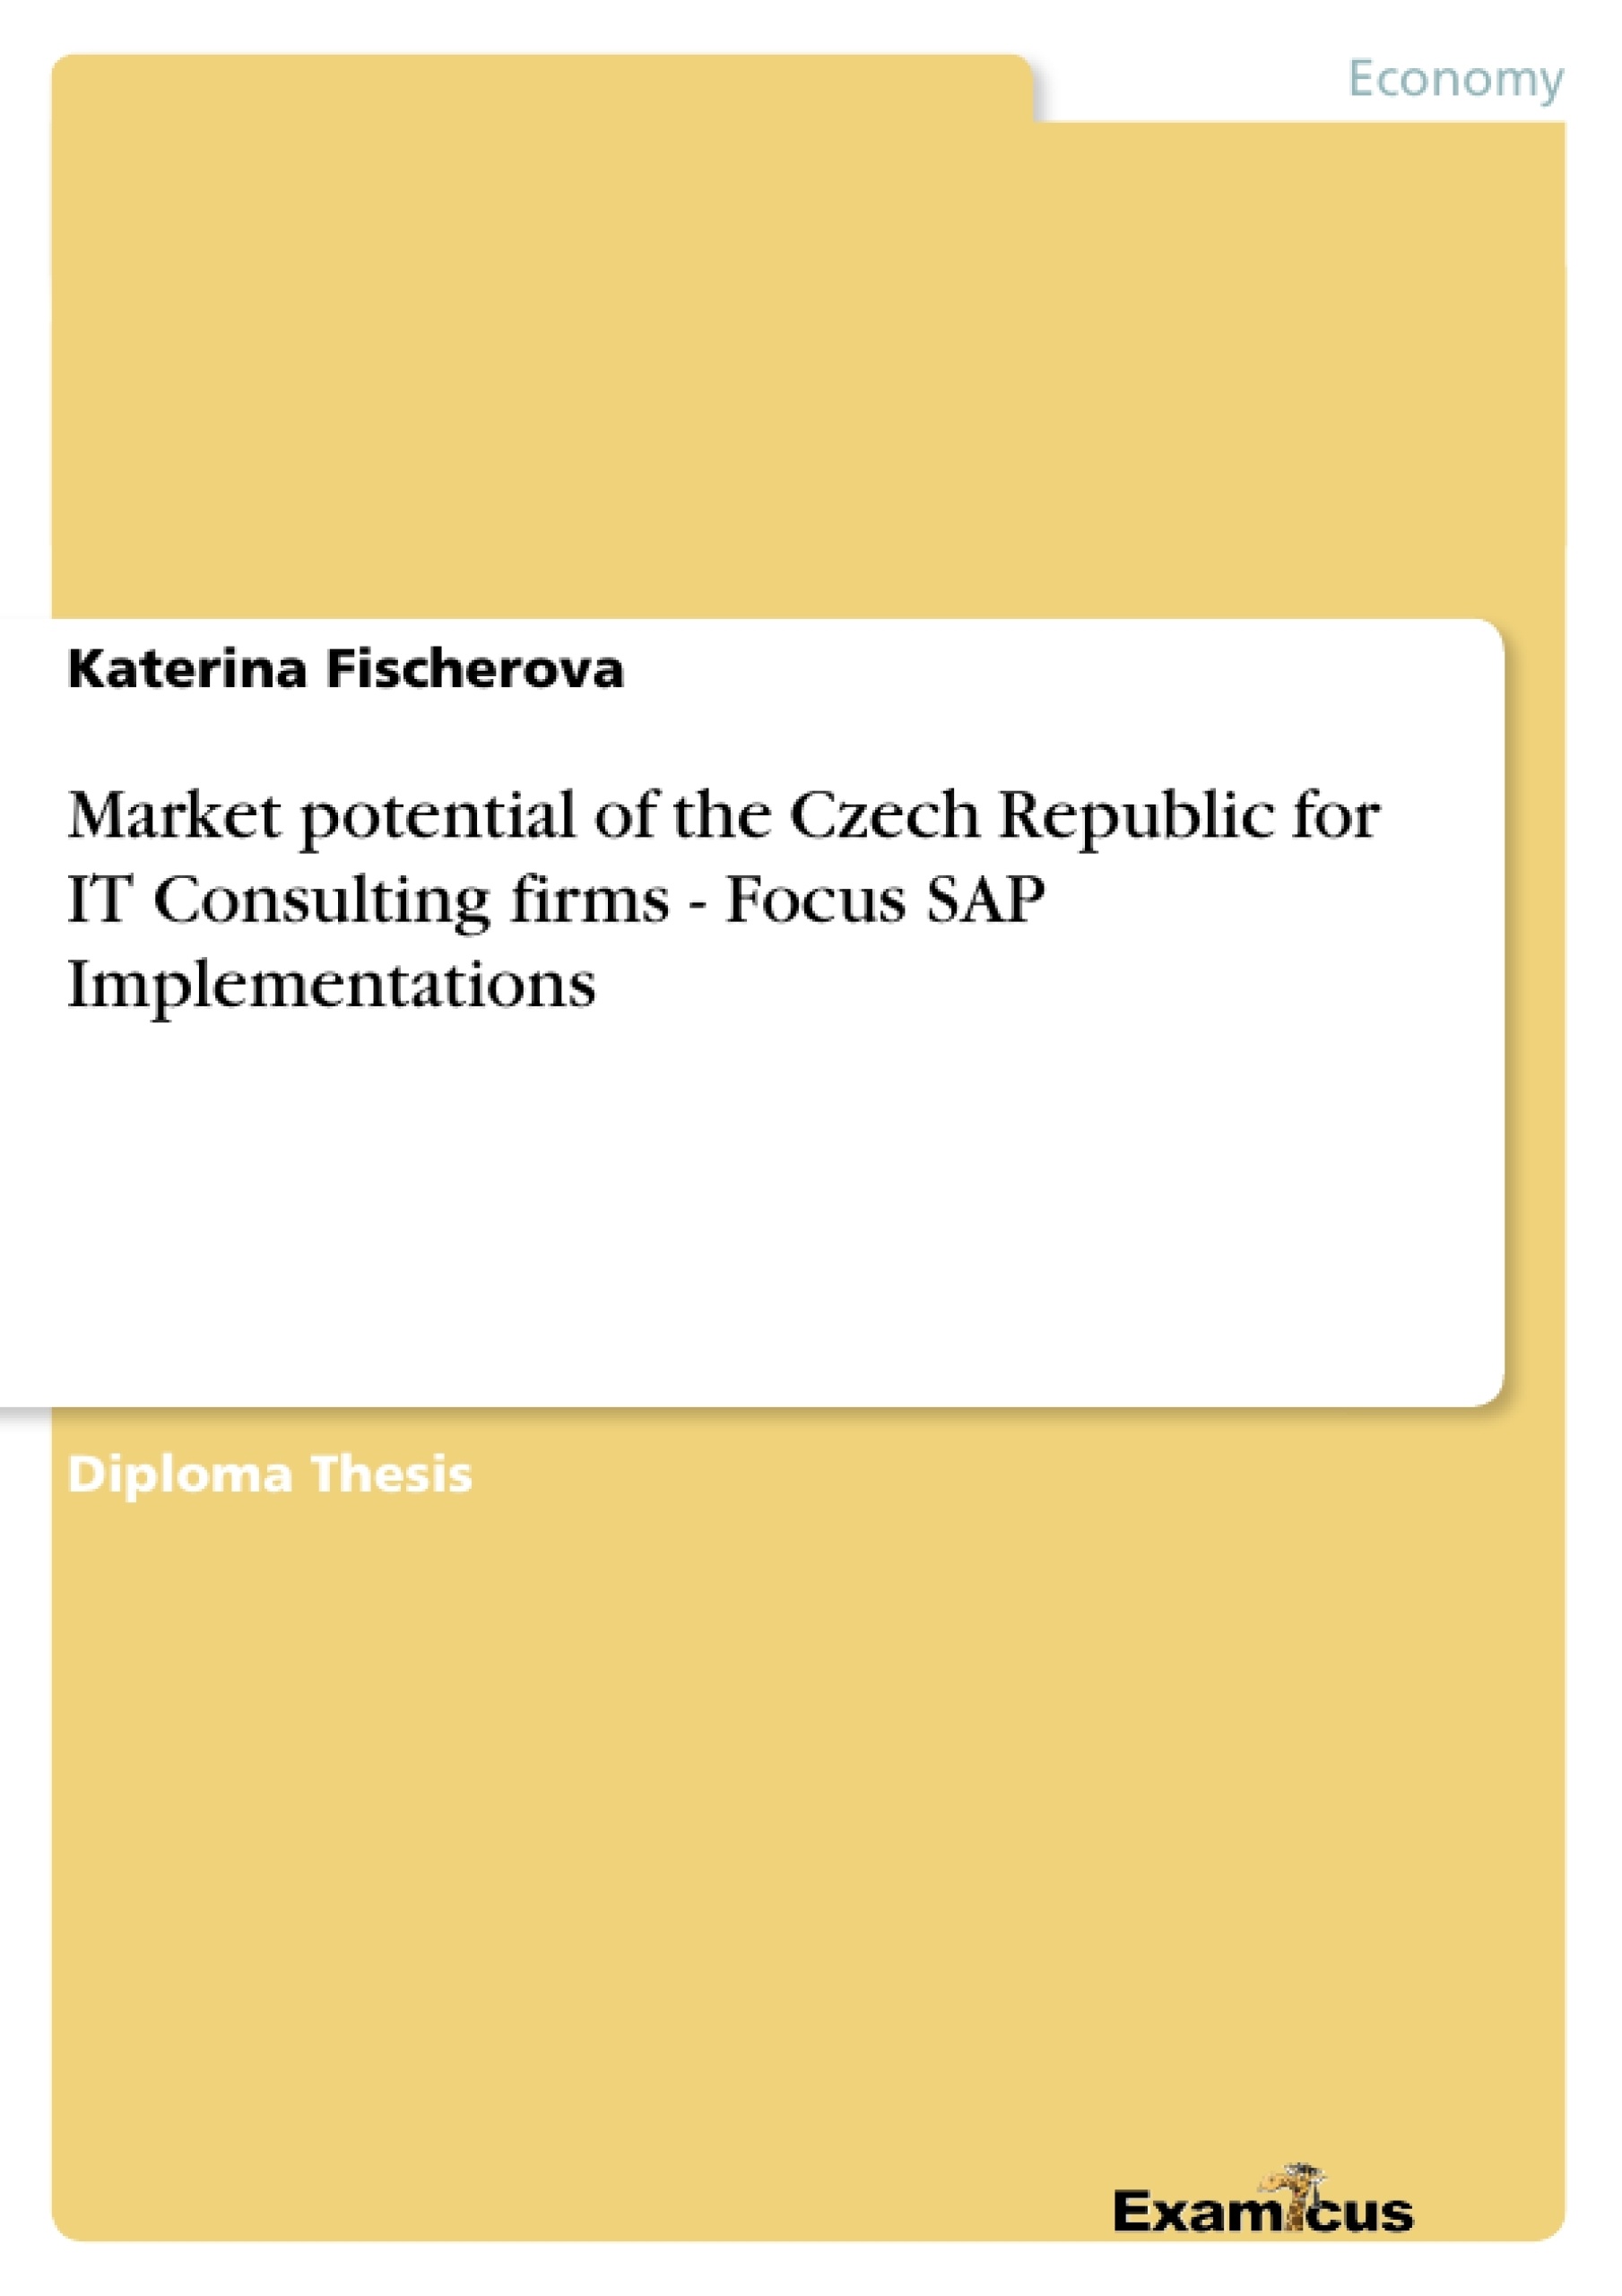 Título: Market potential of the Czech Republic for IT Consulting firms 	- Focus SAP Implementations